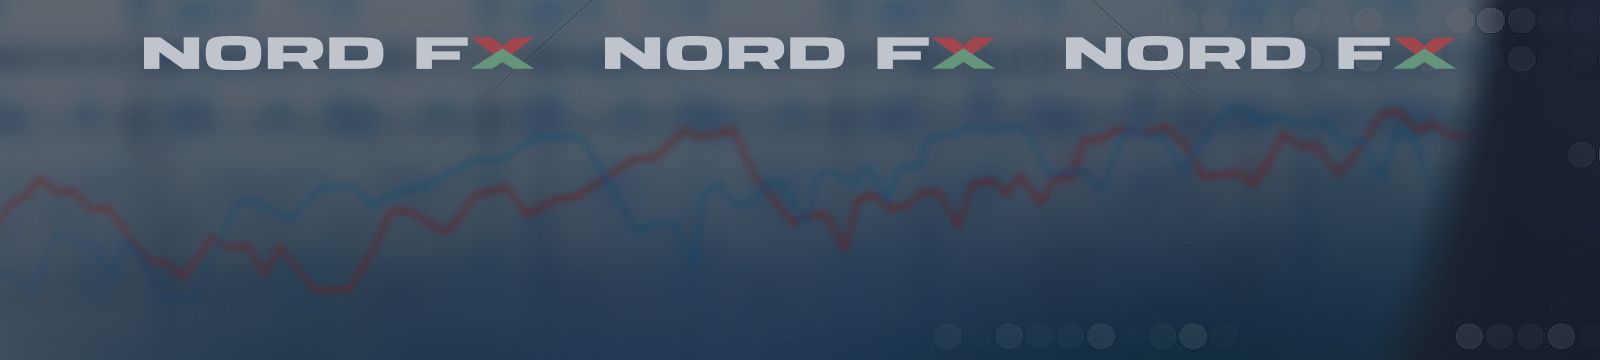 Forex and Cryptocurrency Forecast for May 31 - June 04, 2021